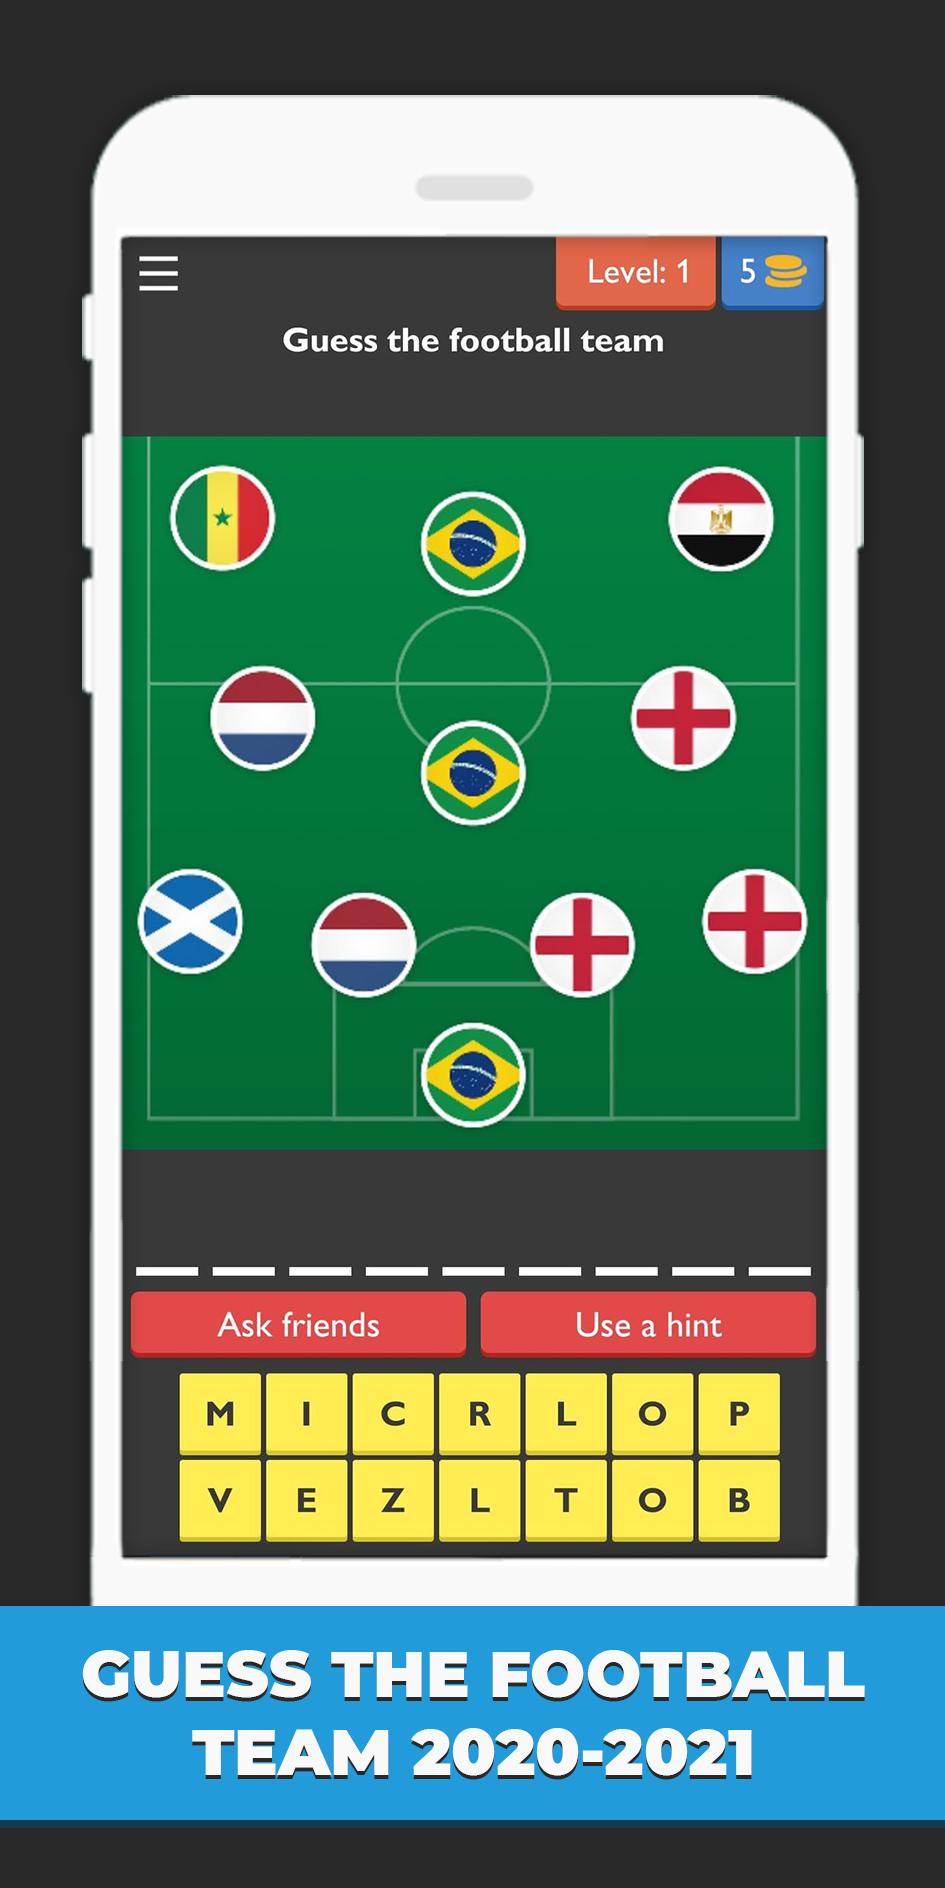 Guess Team 2020-2021 - Football Quiz for Android - APK Download